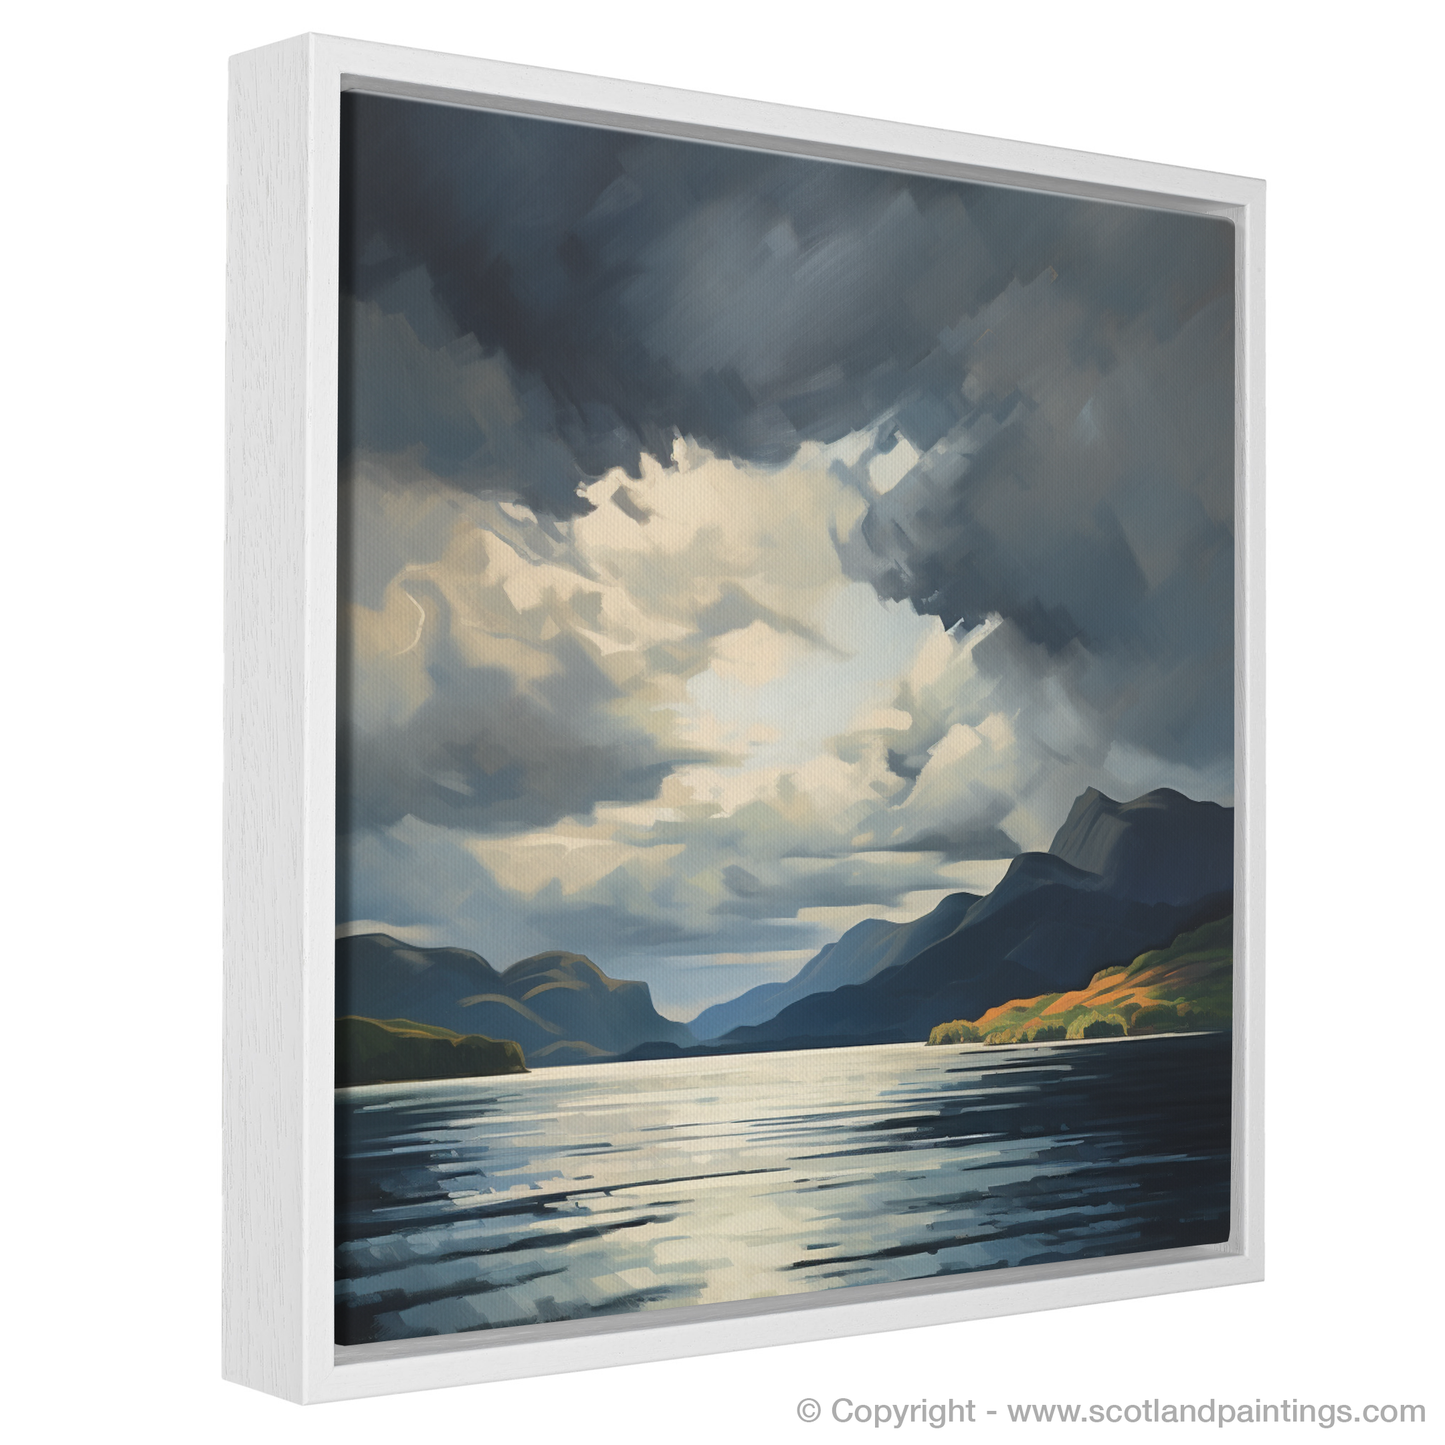 Painting and Art Print of Storm clouds above Loch Lomond entitled "Storm Clouds over Loch Lomond: A Study in Light and Shadow".